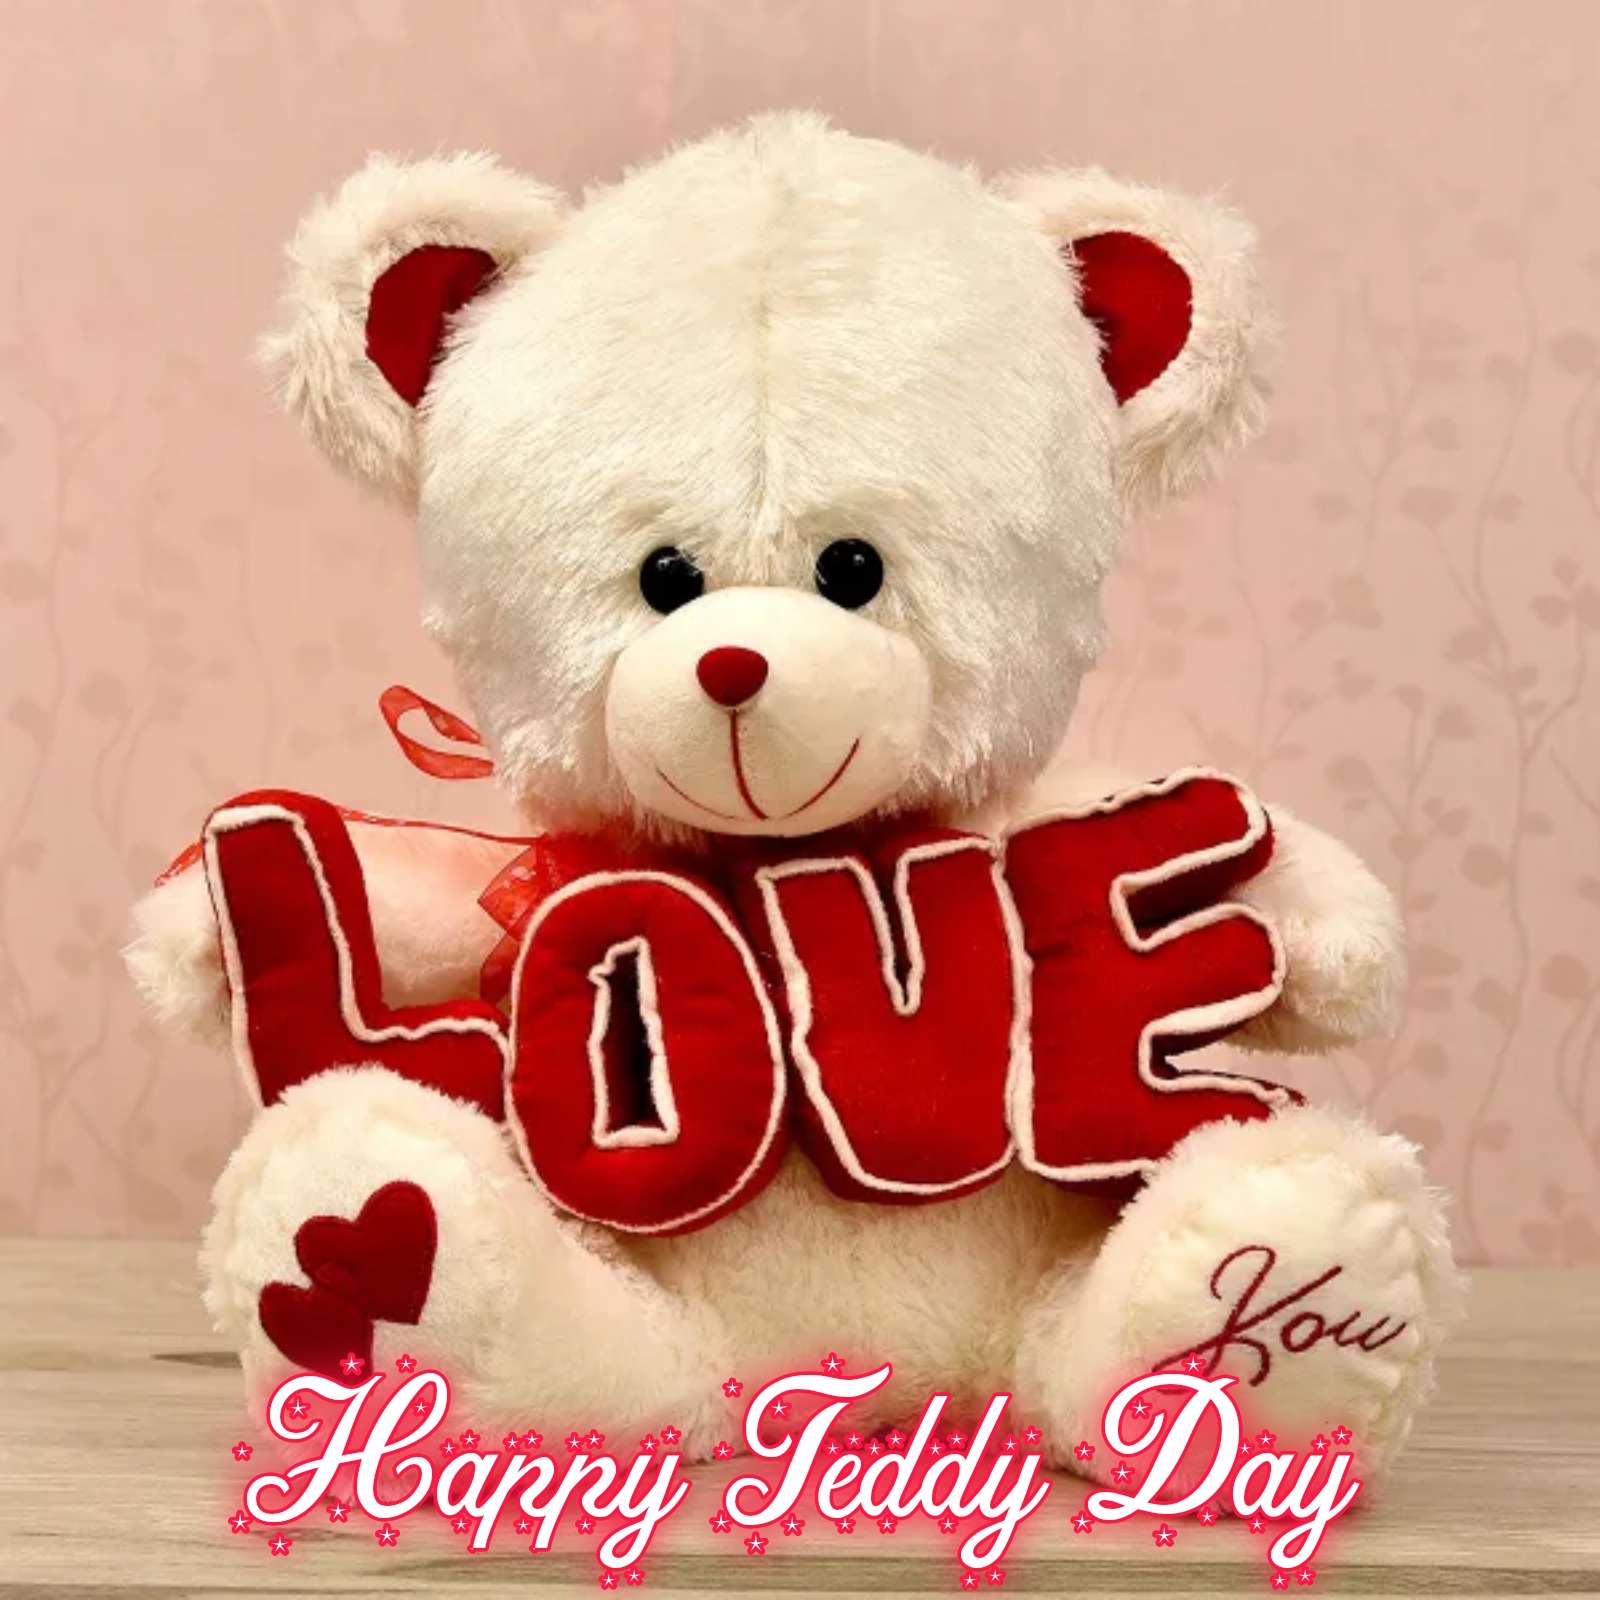 Happy Teddy Images Download